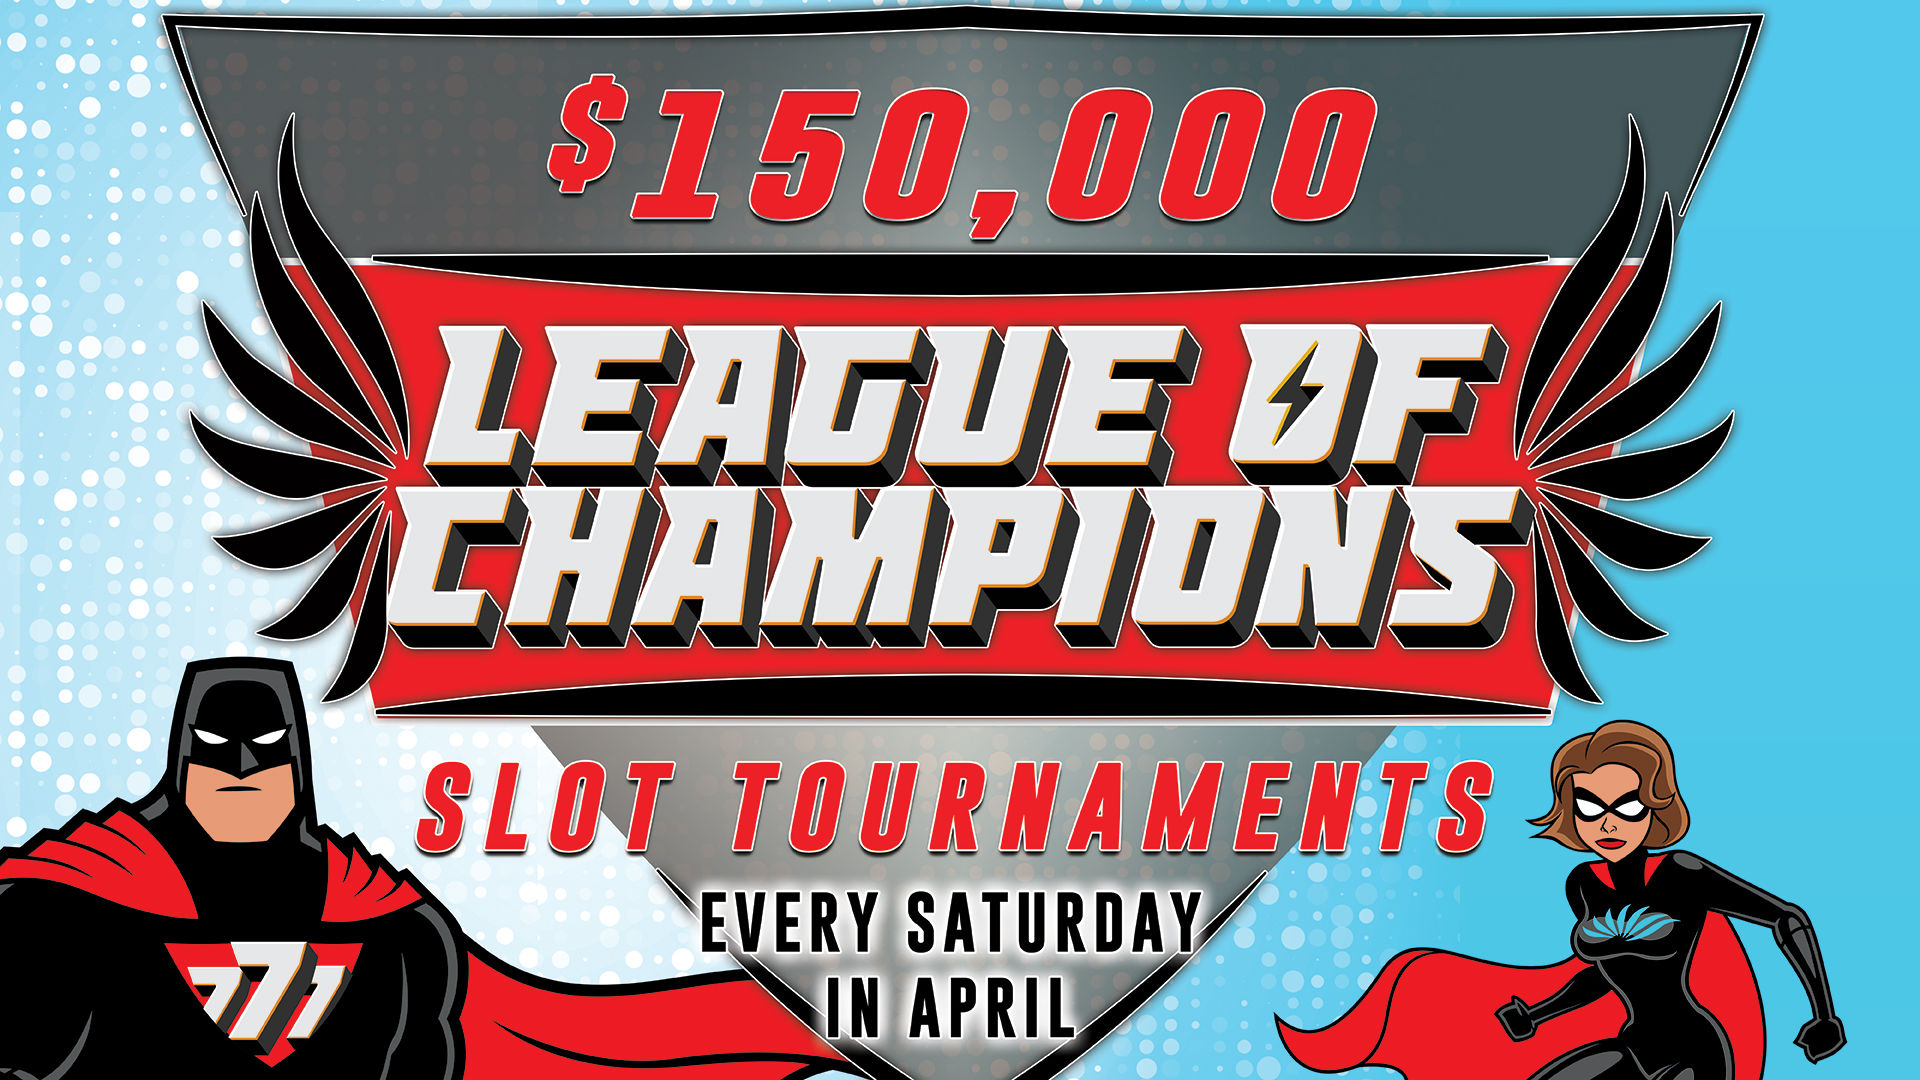 Seven Feathers Casino Resort Offers Players A Chance To Win Each Saturday In April With League Of Champions Slot Tournaments